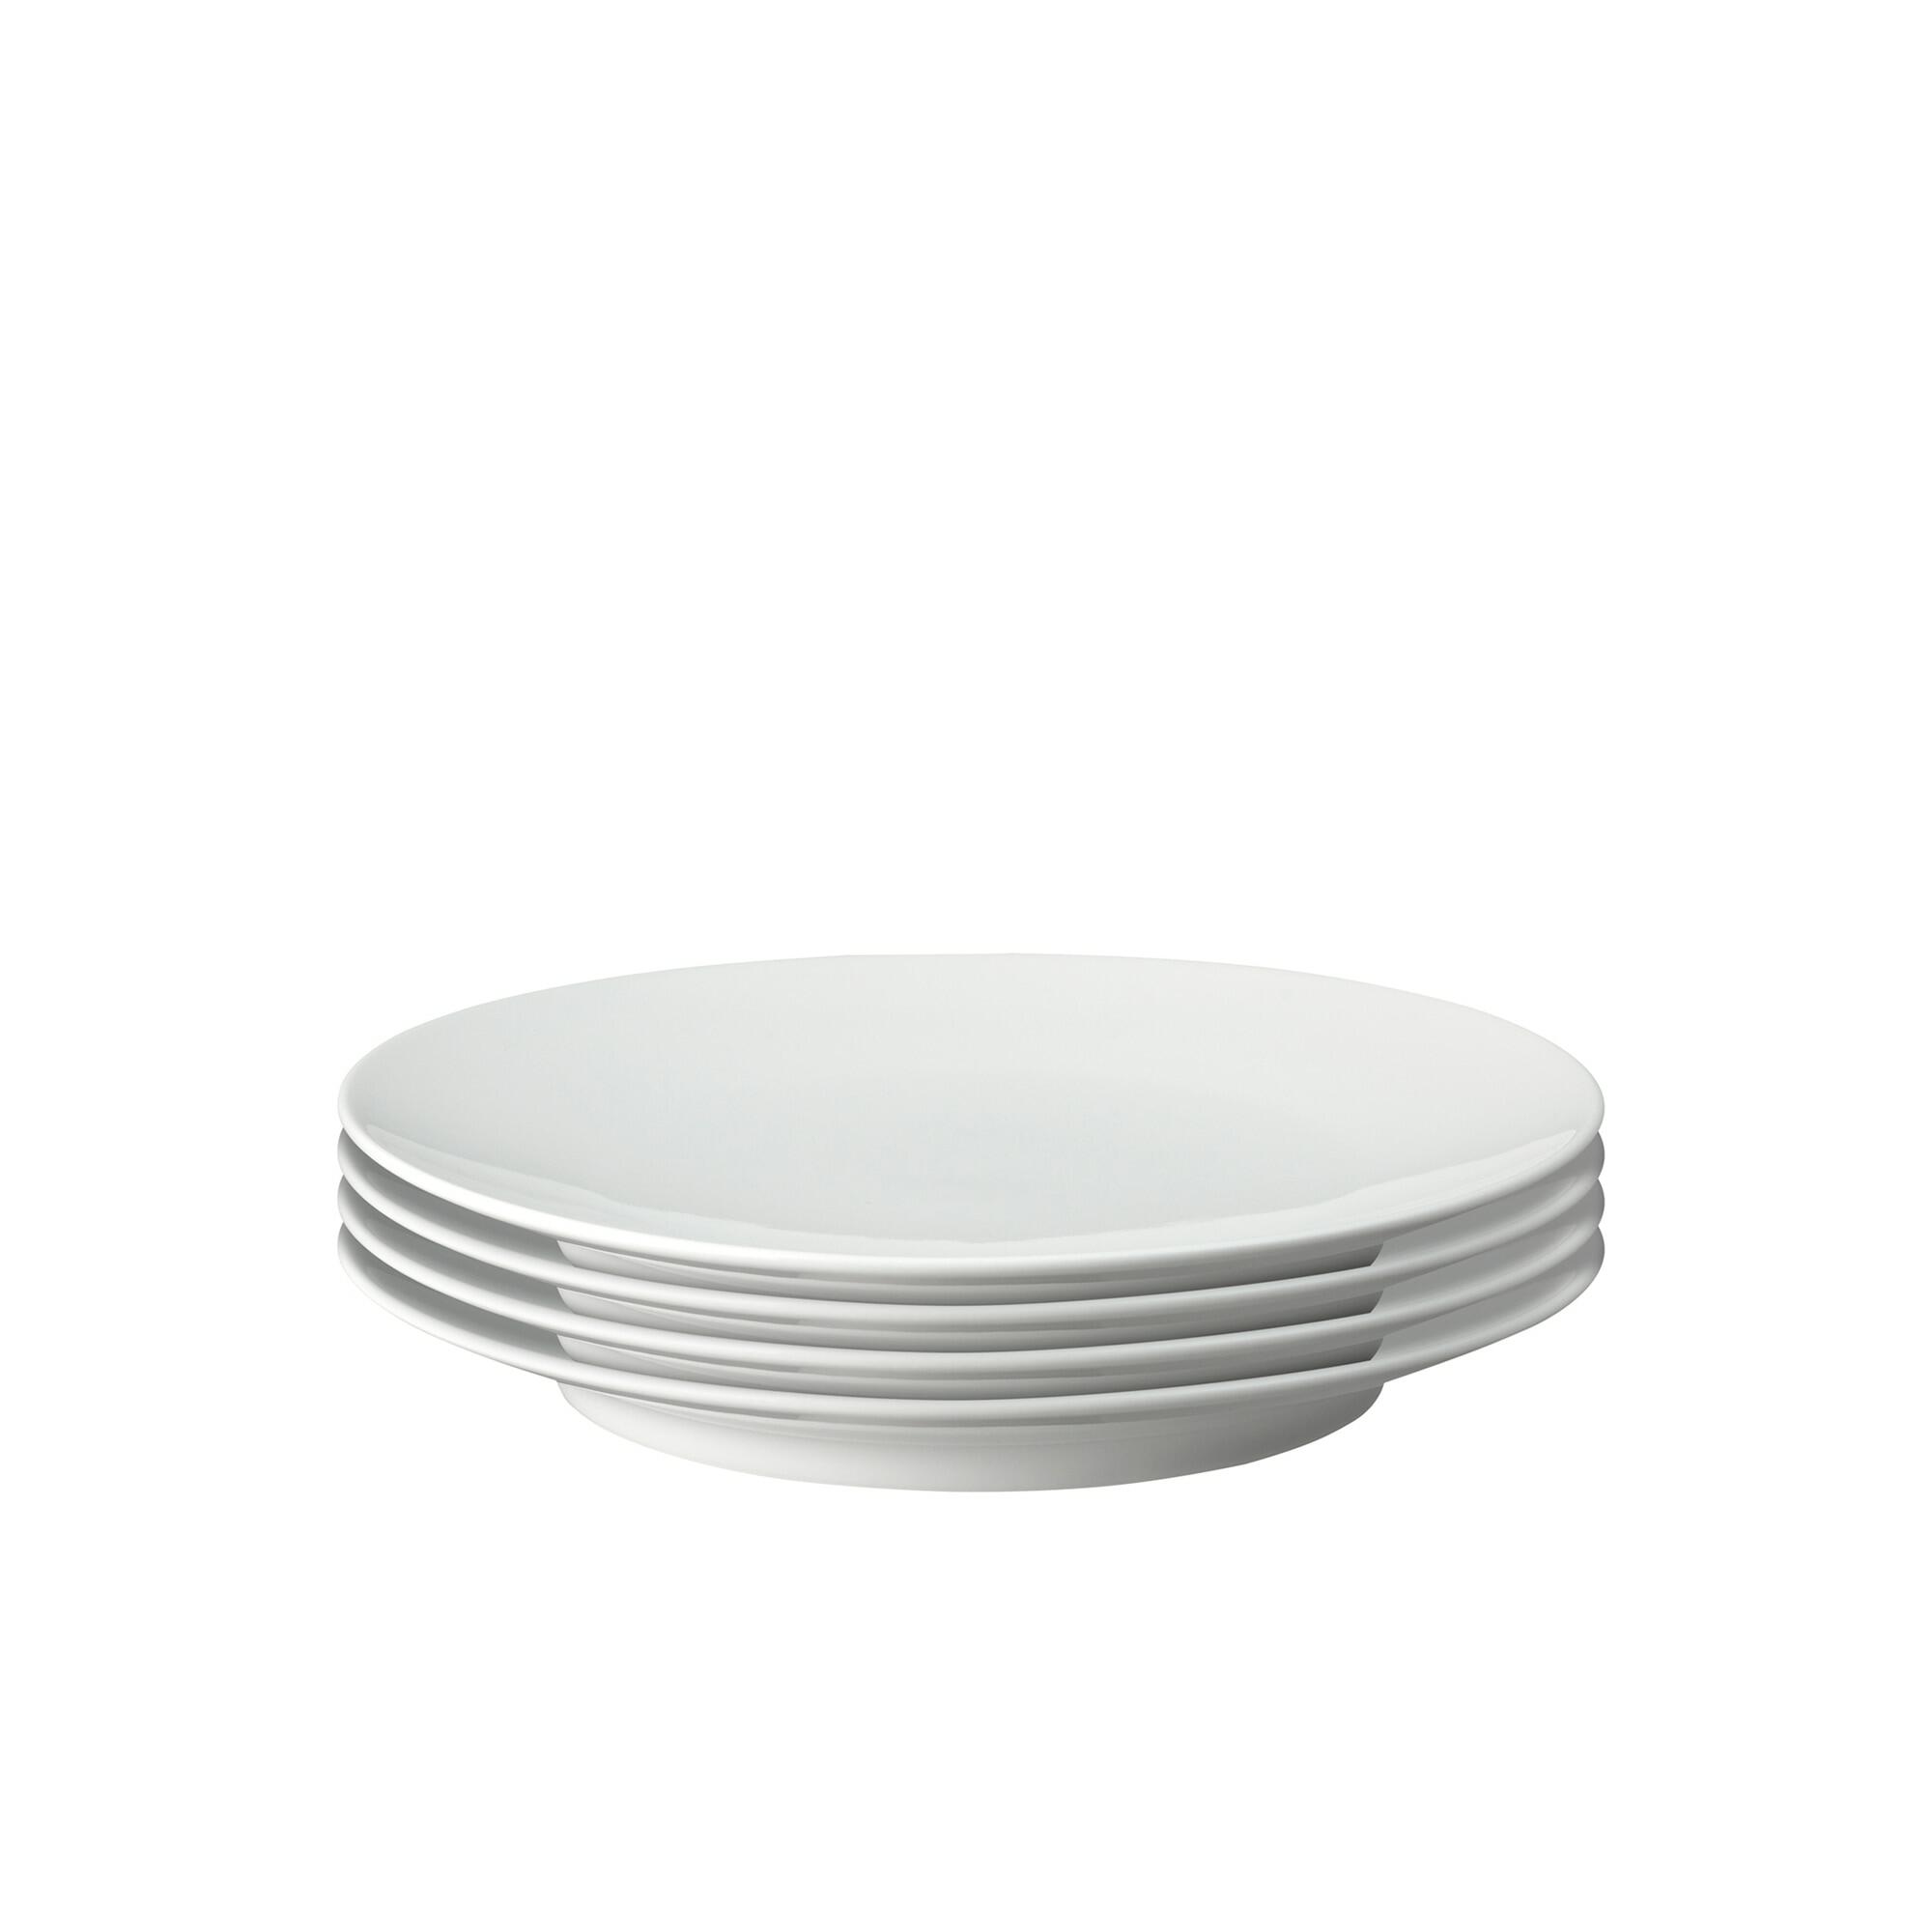 Porcelain Classic White Set Of 4 Small Plates